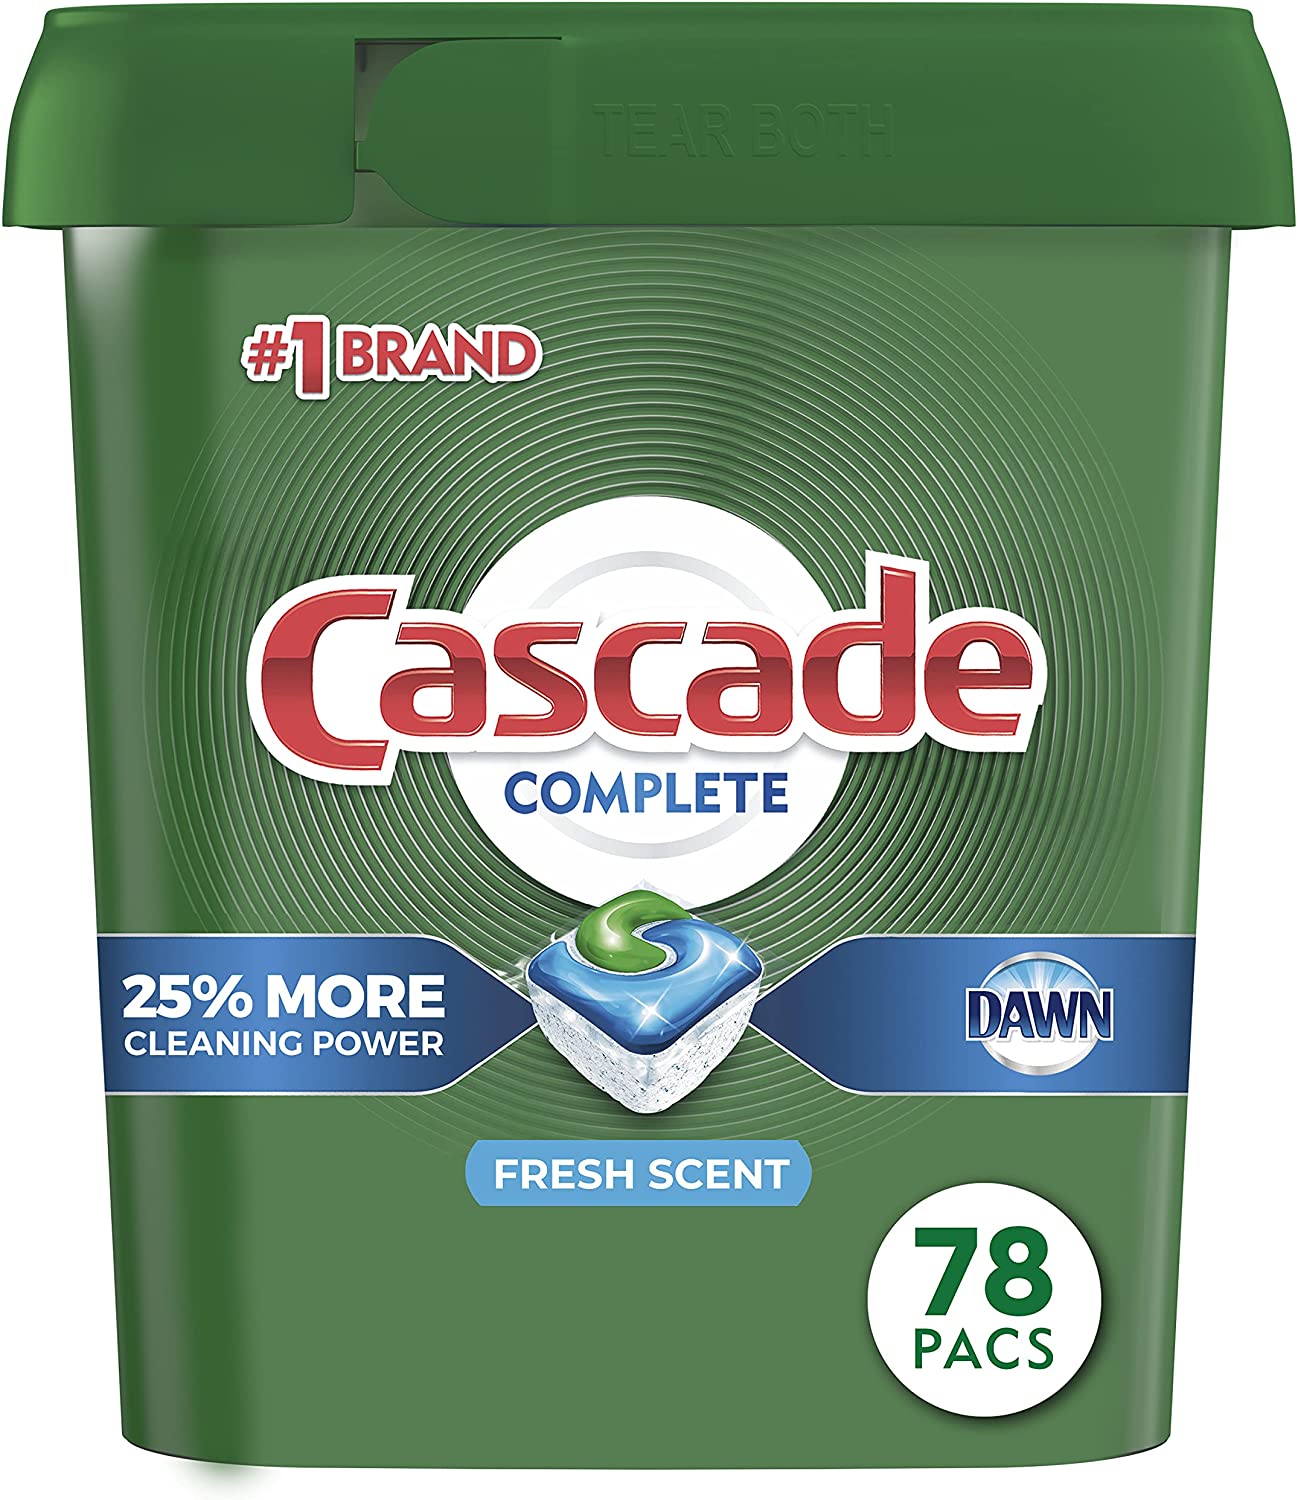 Cascade Complete Dishwasher-Pods @ Amazon: 234 pods for $38.52 (16 cents per top rated pod)